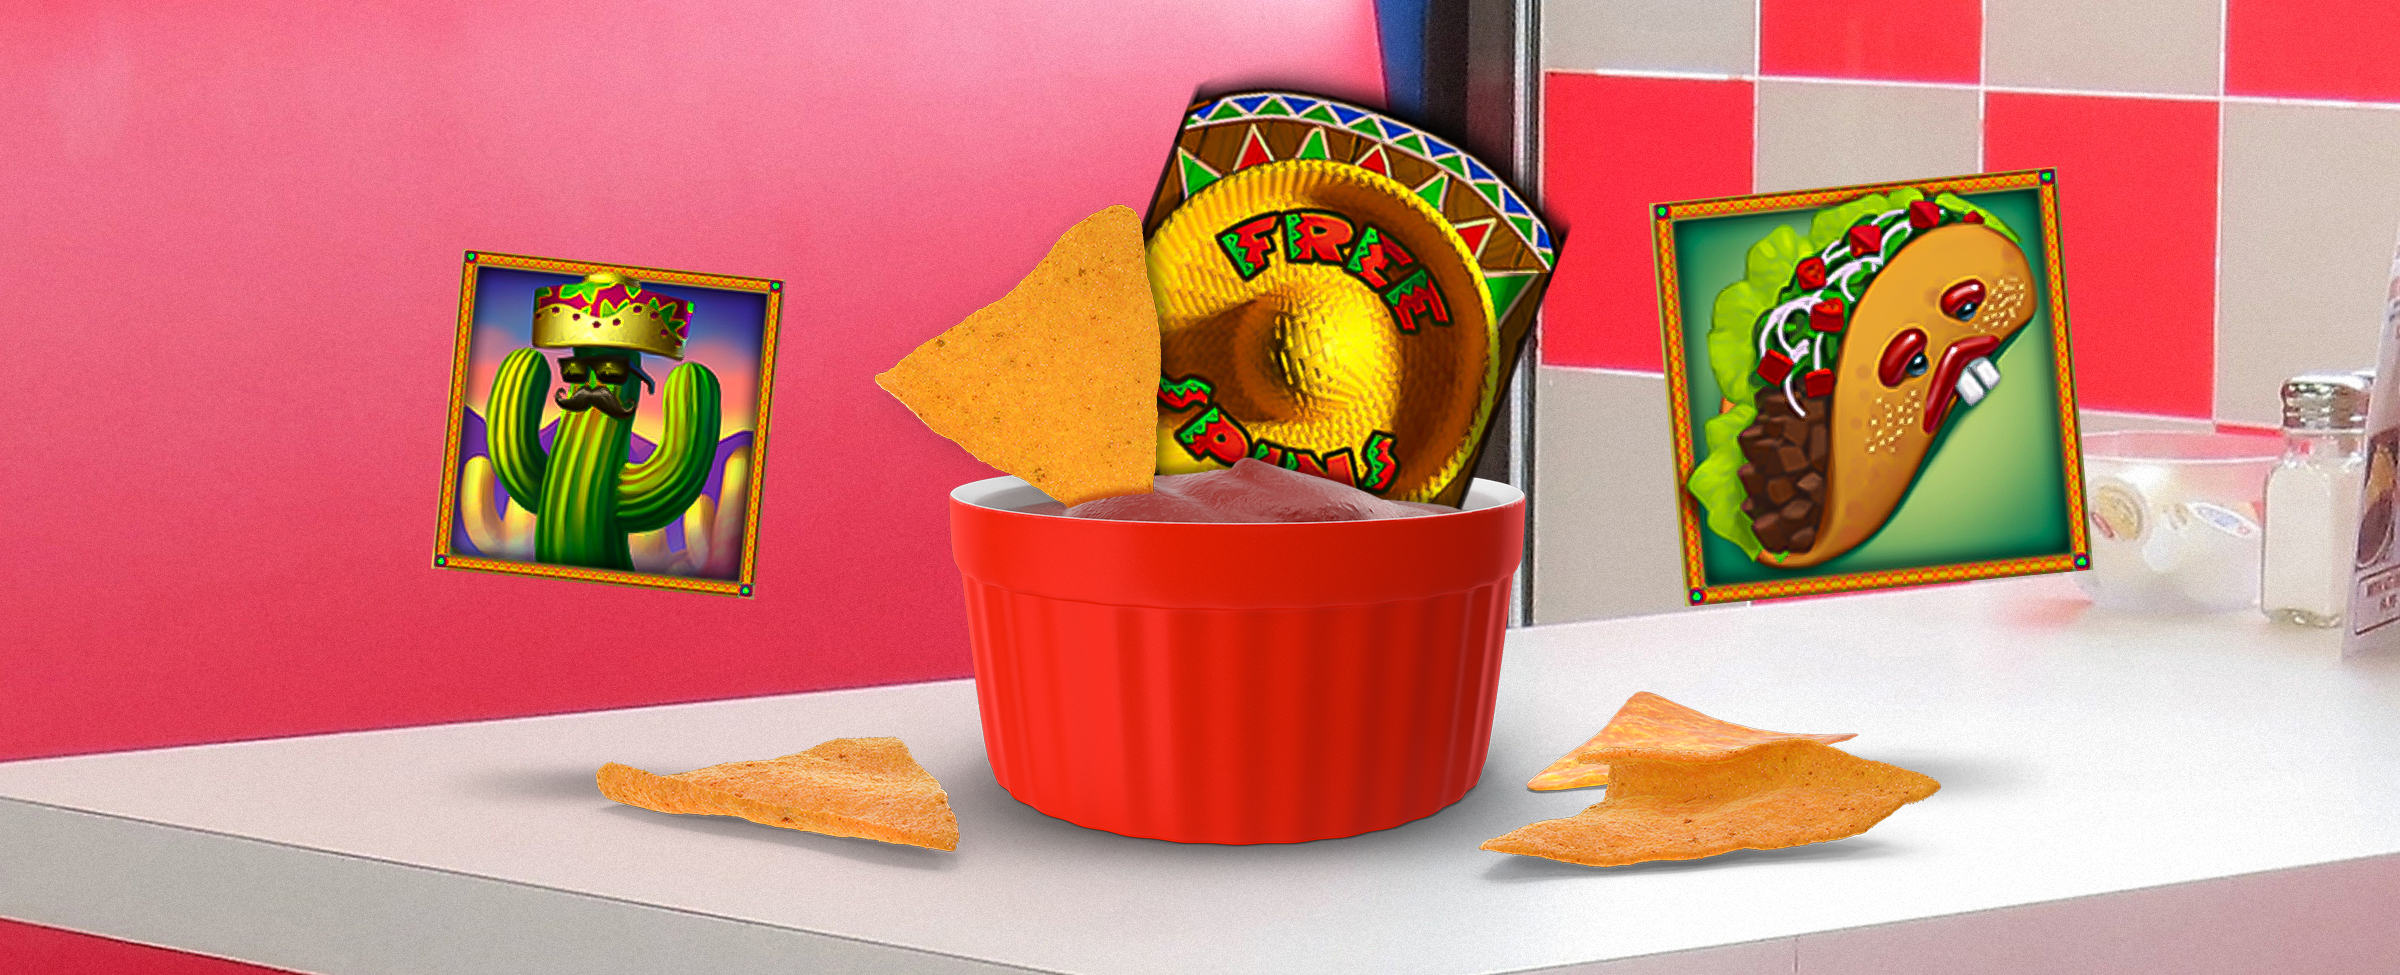 On top of a white cafe table top is a red ramekin filled with salsa and a corn chip wedged in it, with a straw Mexican hat that has the words “free spins” printed around the rim. To the right is an illustrated icon of a taco, while on the left, an illustration of a cactus wearing a sombrero, glasses, and mustache.